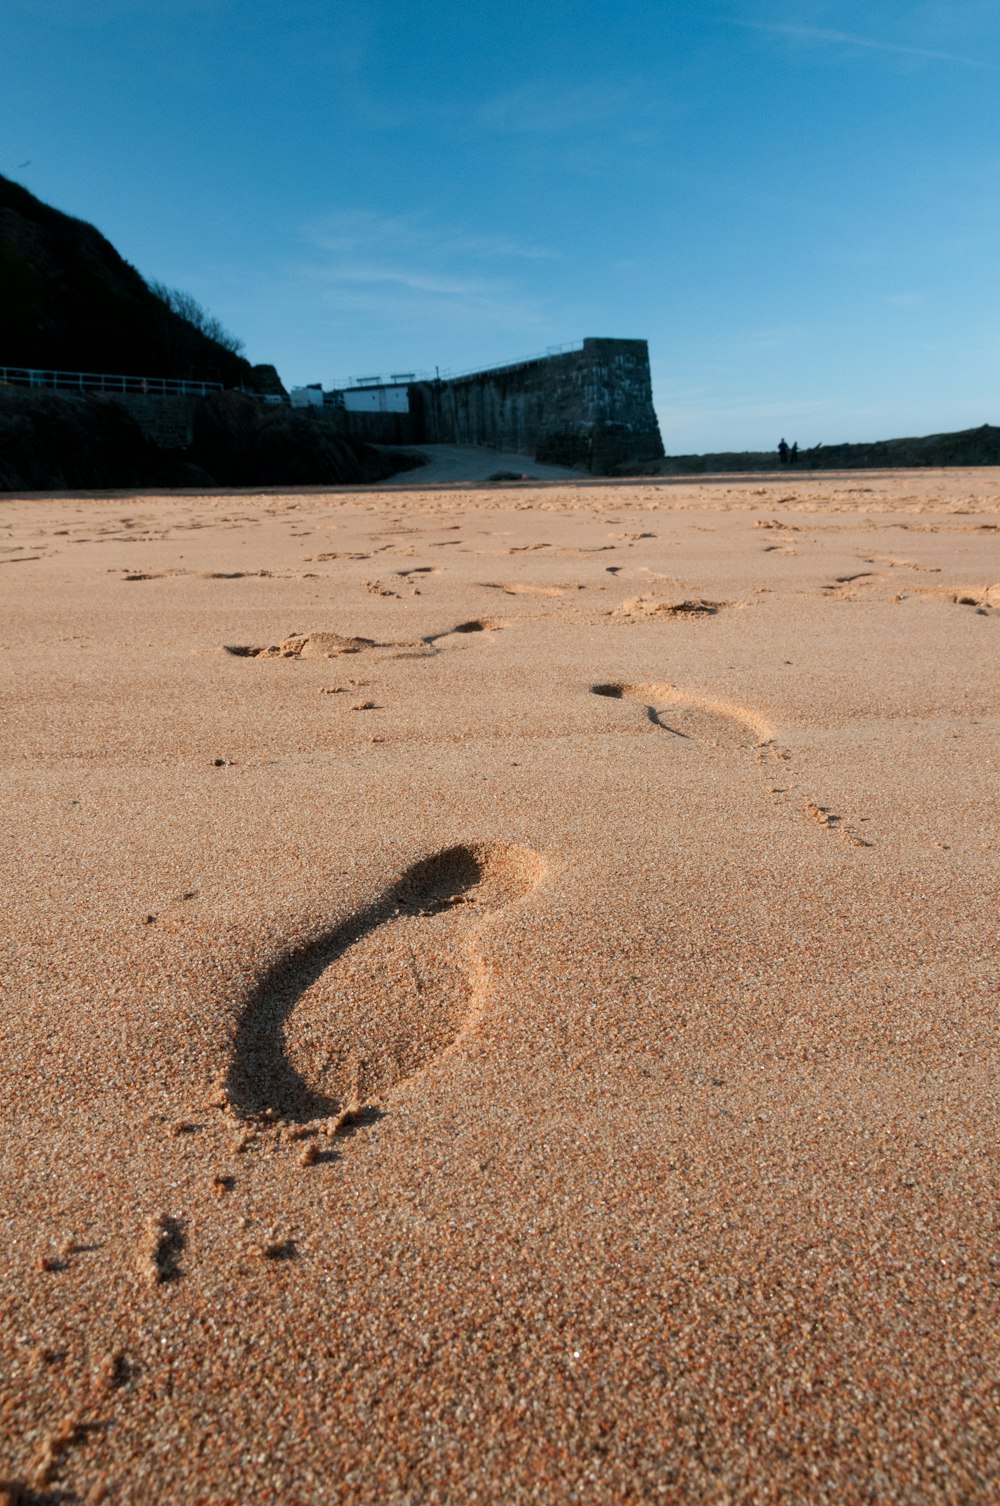 a person's footprints in the sand on a beach